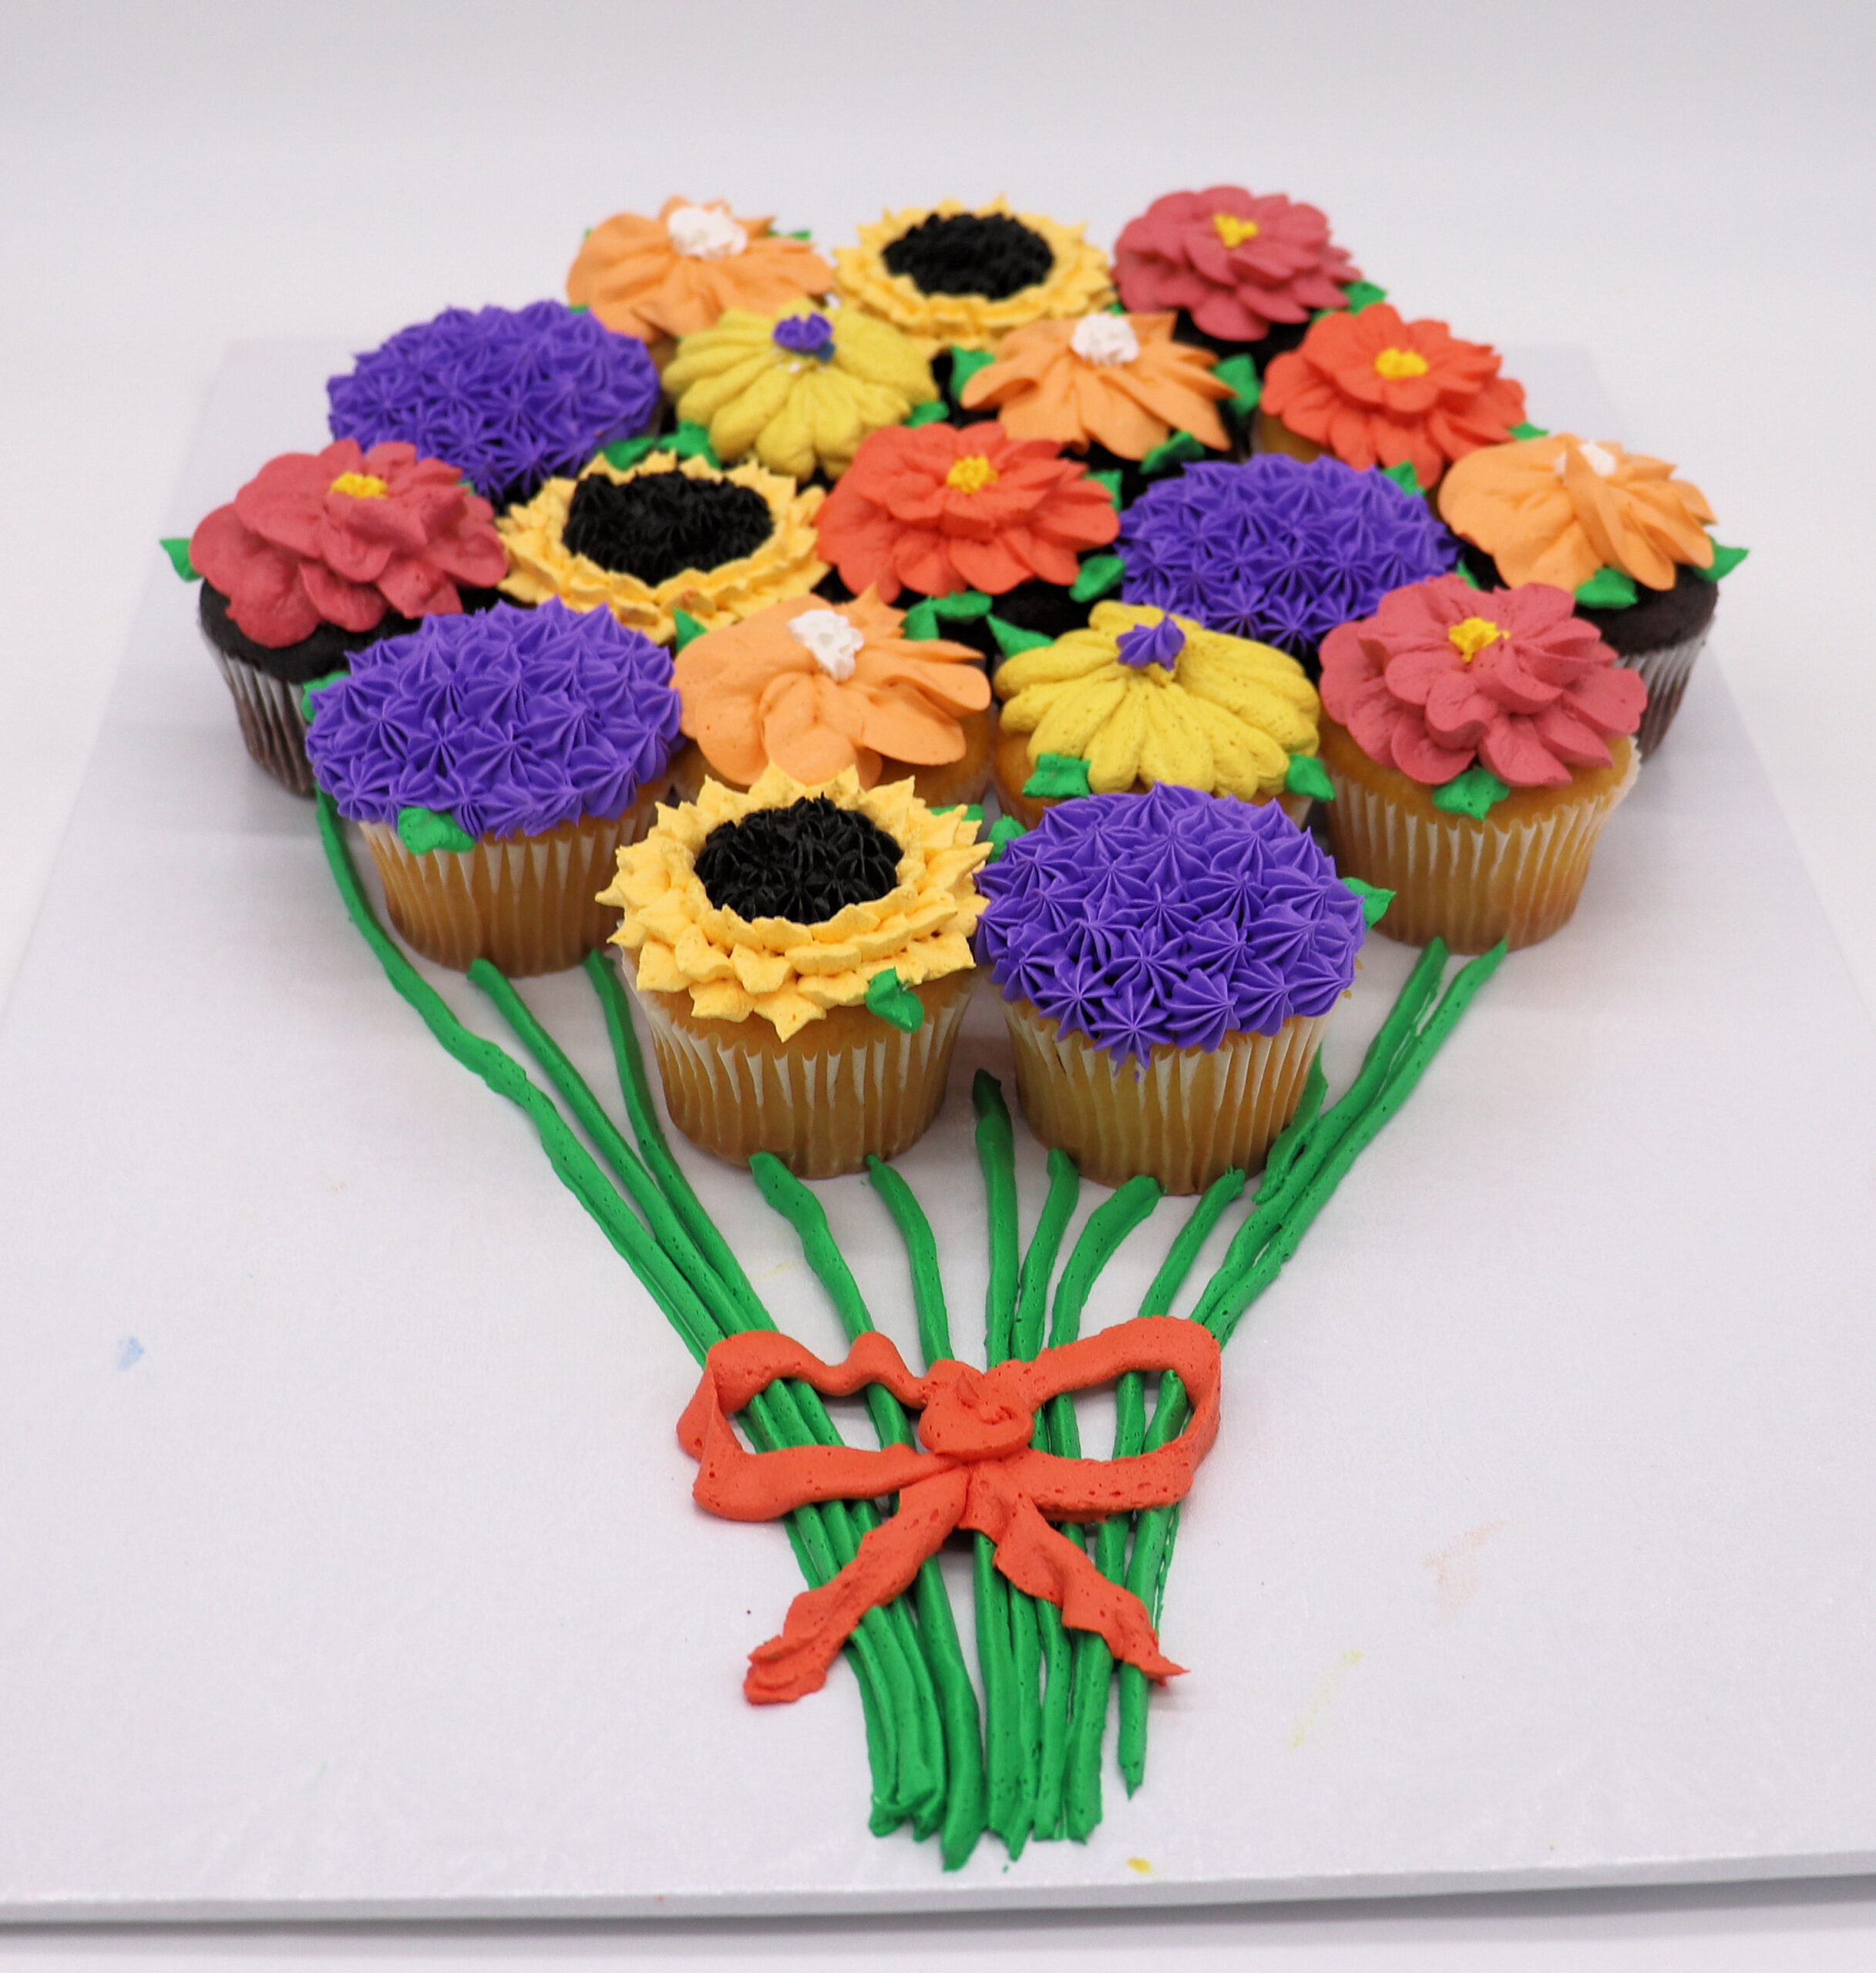 Cupcake Bouquet For Special Events - Made In A Pinch